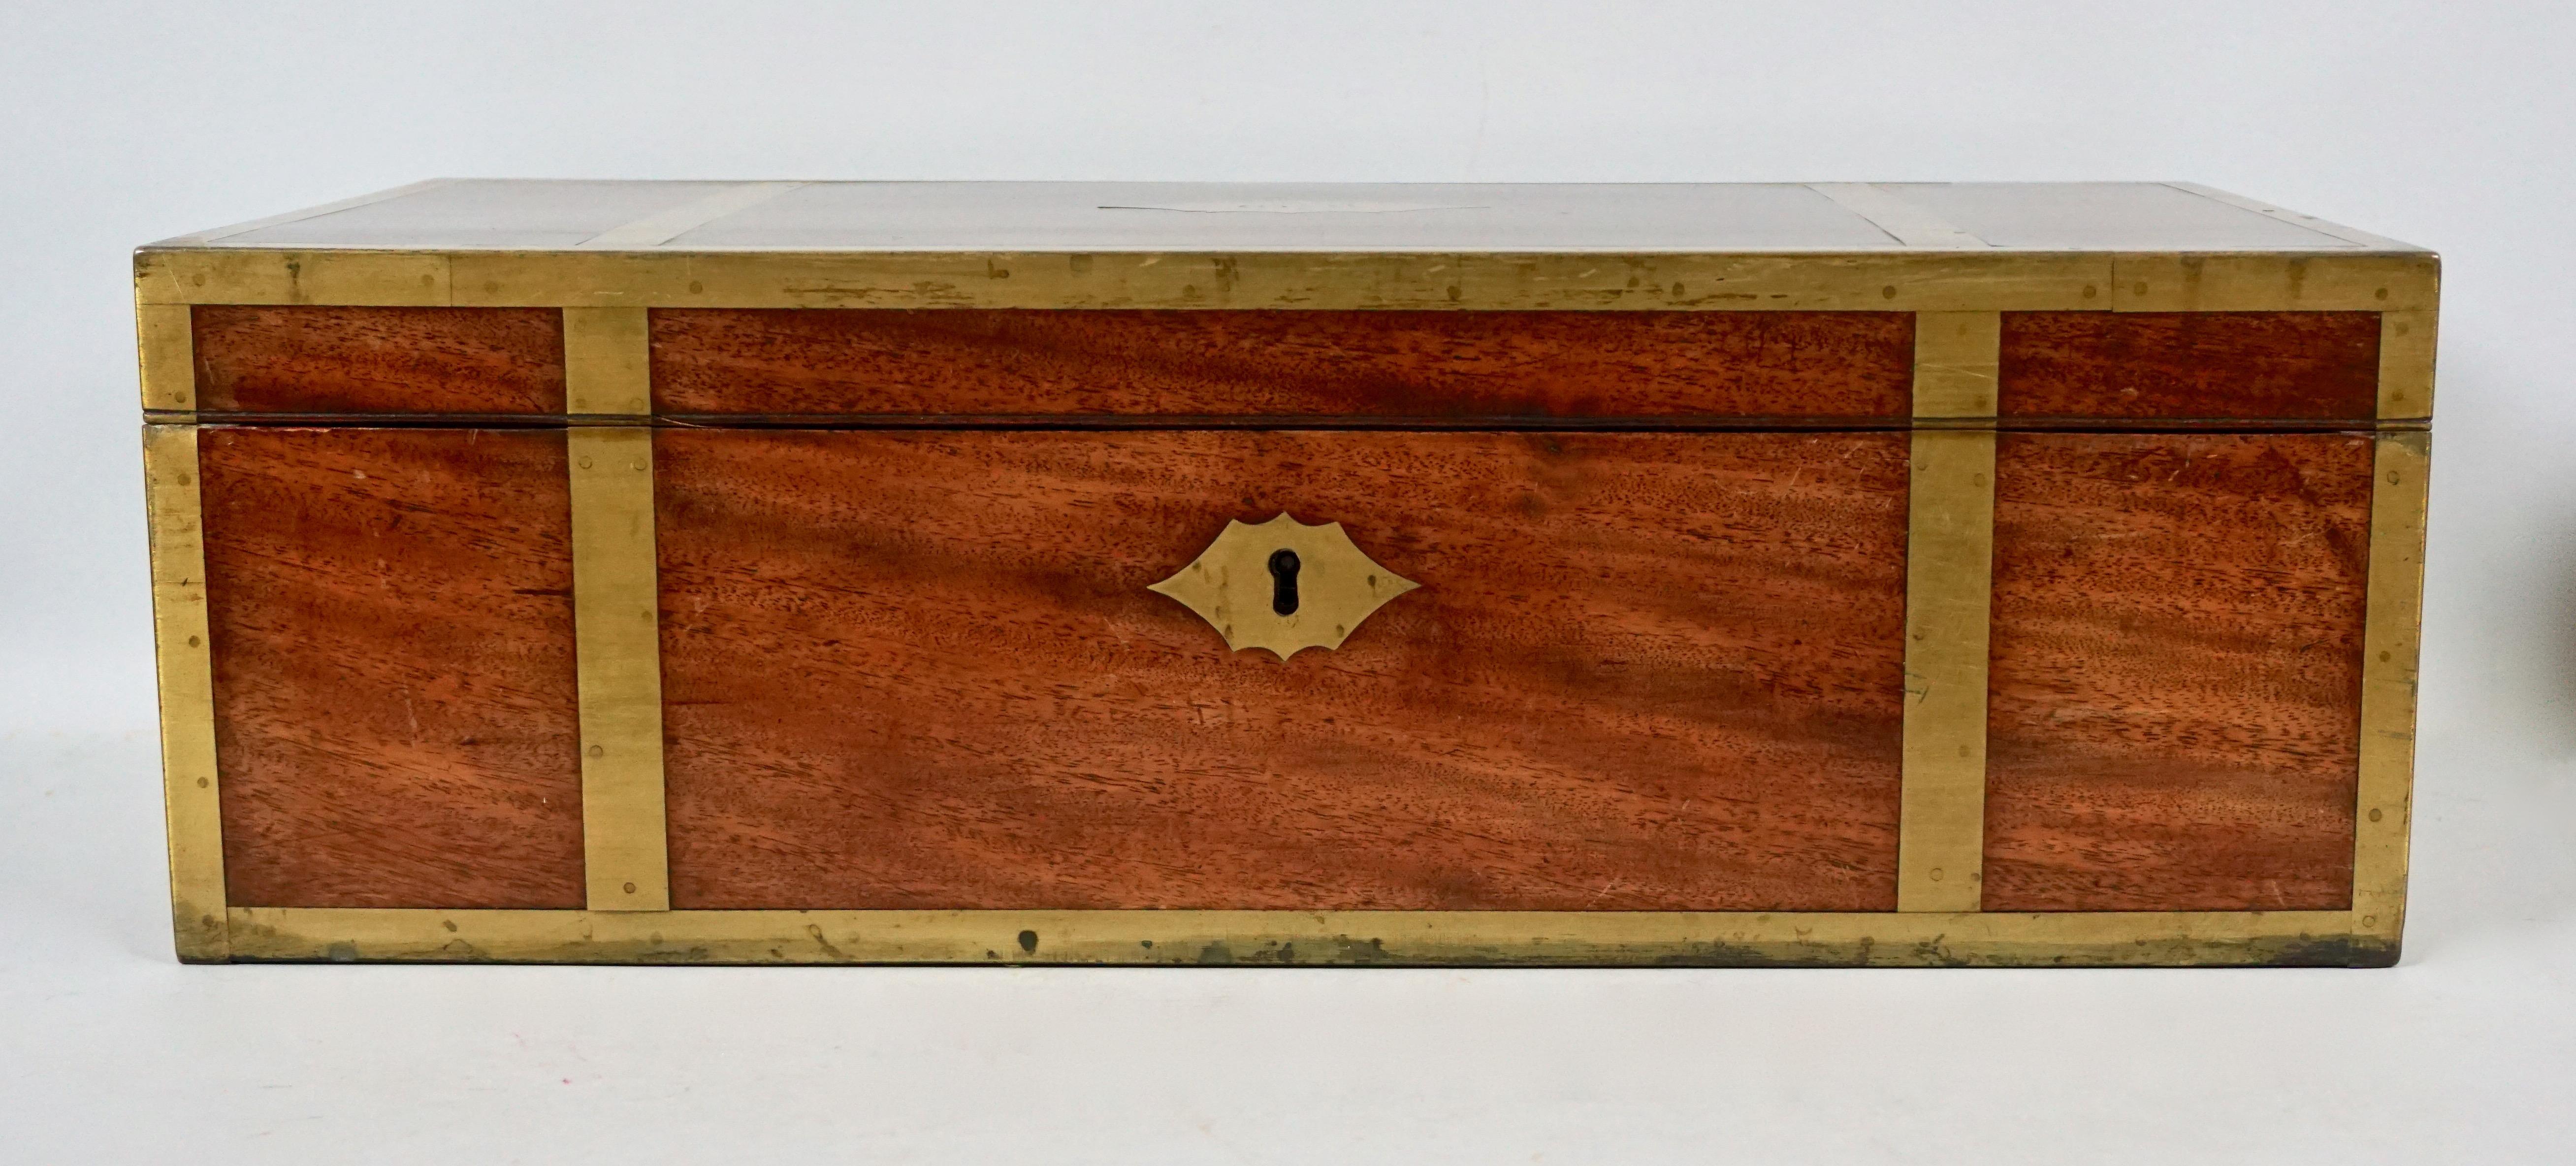 An English mahogany campaign style brass bound traveling desk with recessed handles and a long exterior side drawer, the interior with a velvet lined writing slope, inkwell, pen compartments and letter wells. The top has a cut brass central